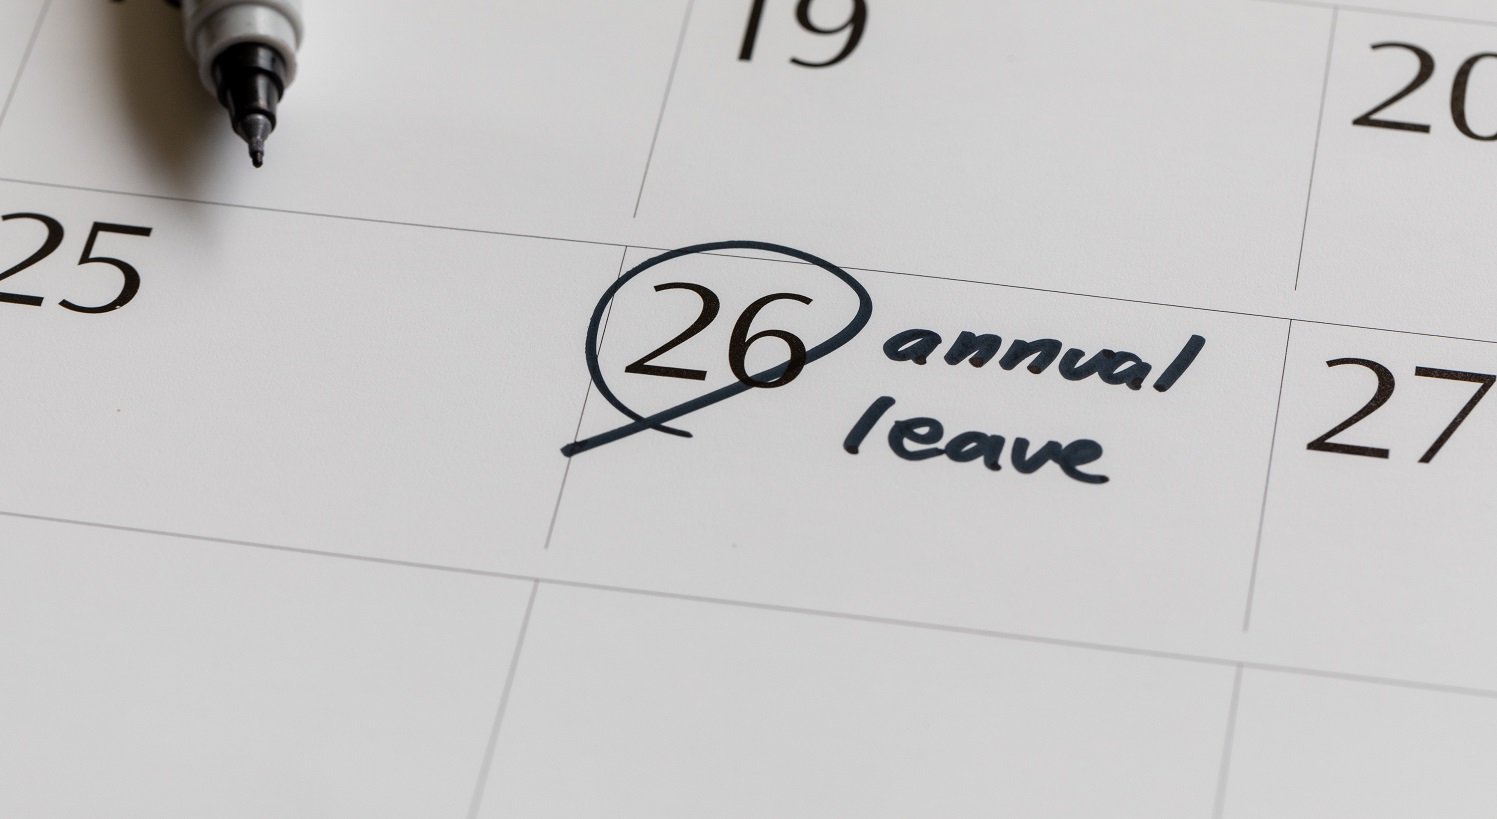 An alternative solution to annual leave